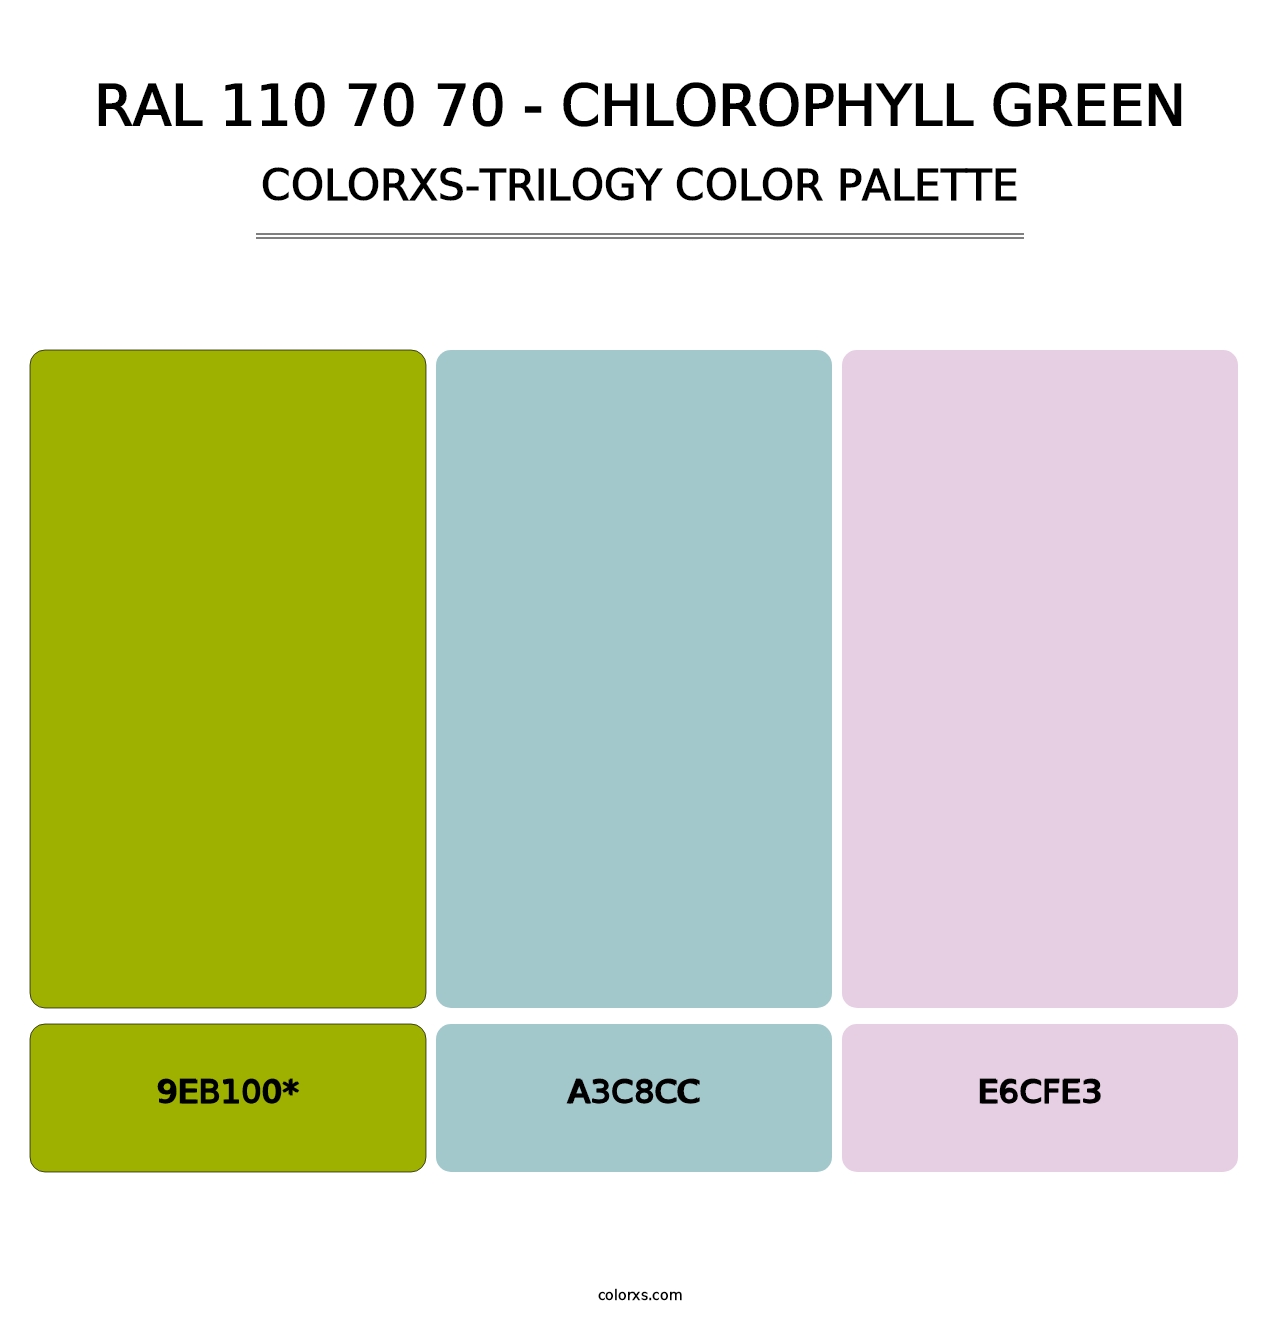 RAL 110 70 70 - Chlorophyll Green - Colorxs Trilogy Palette